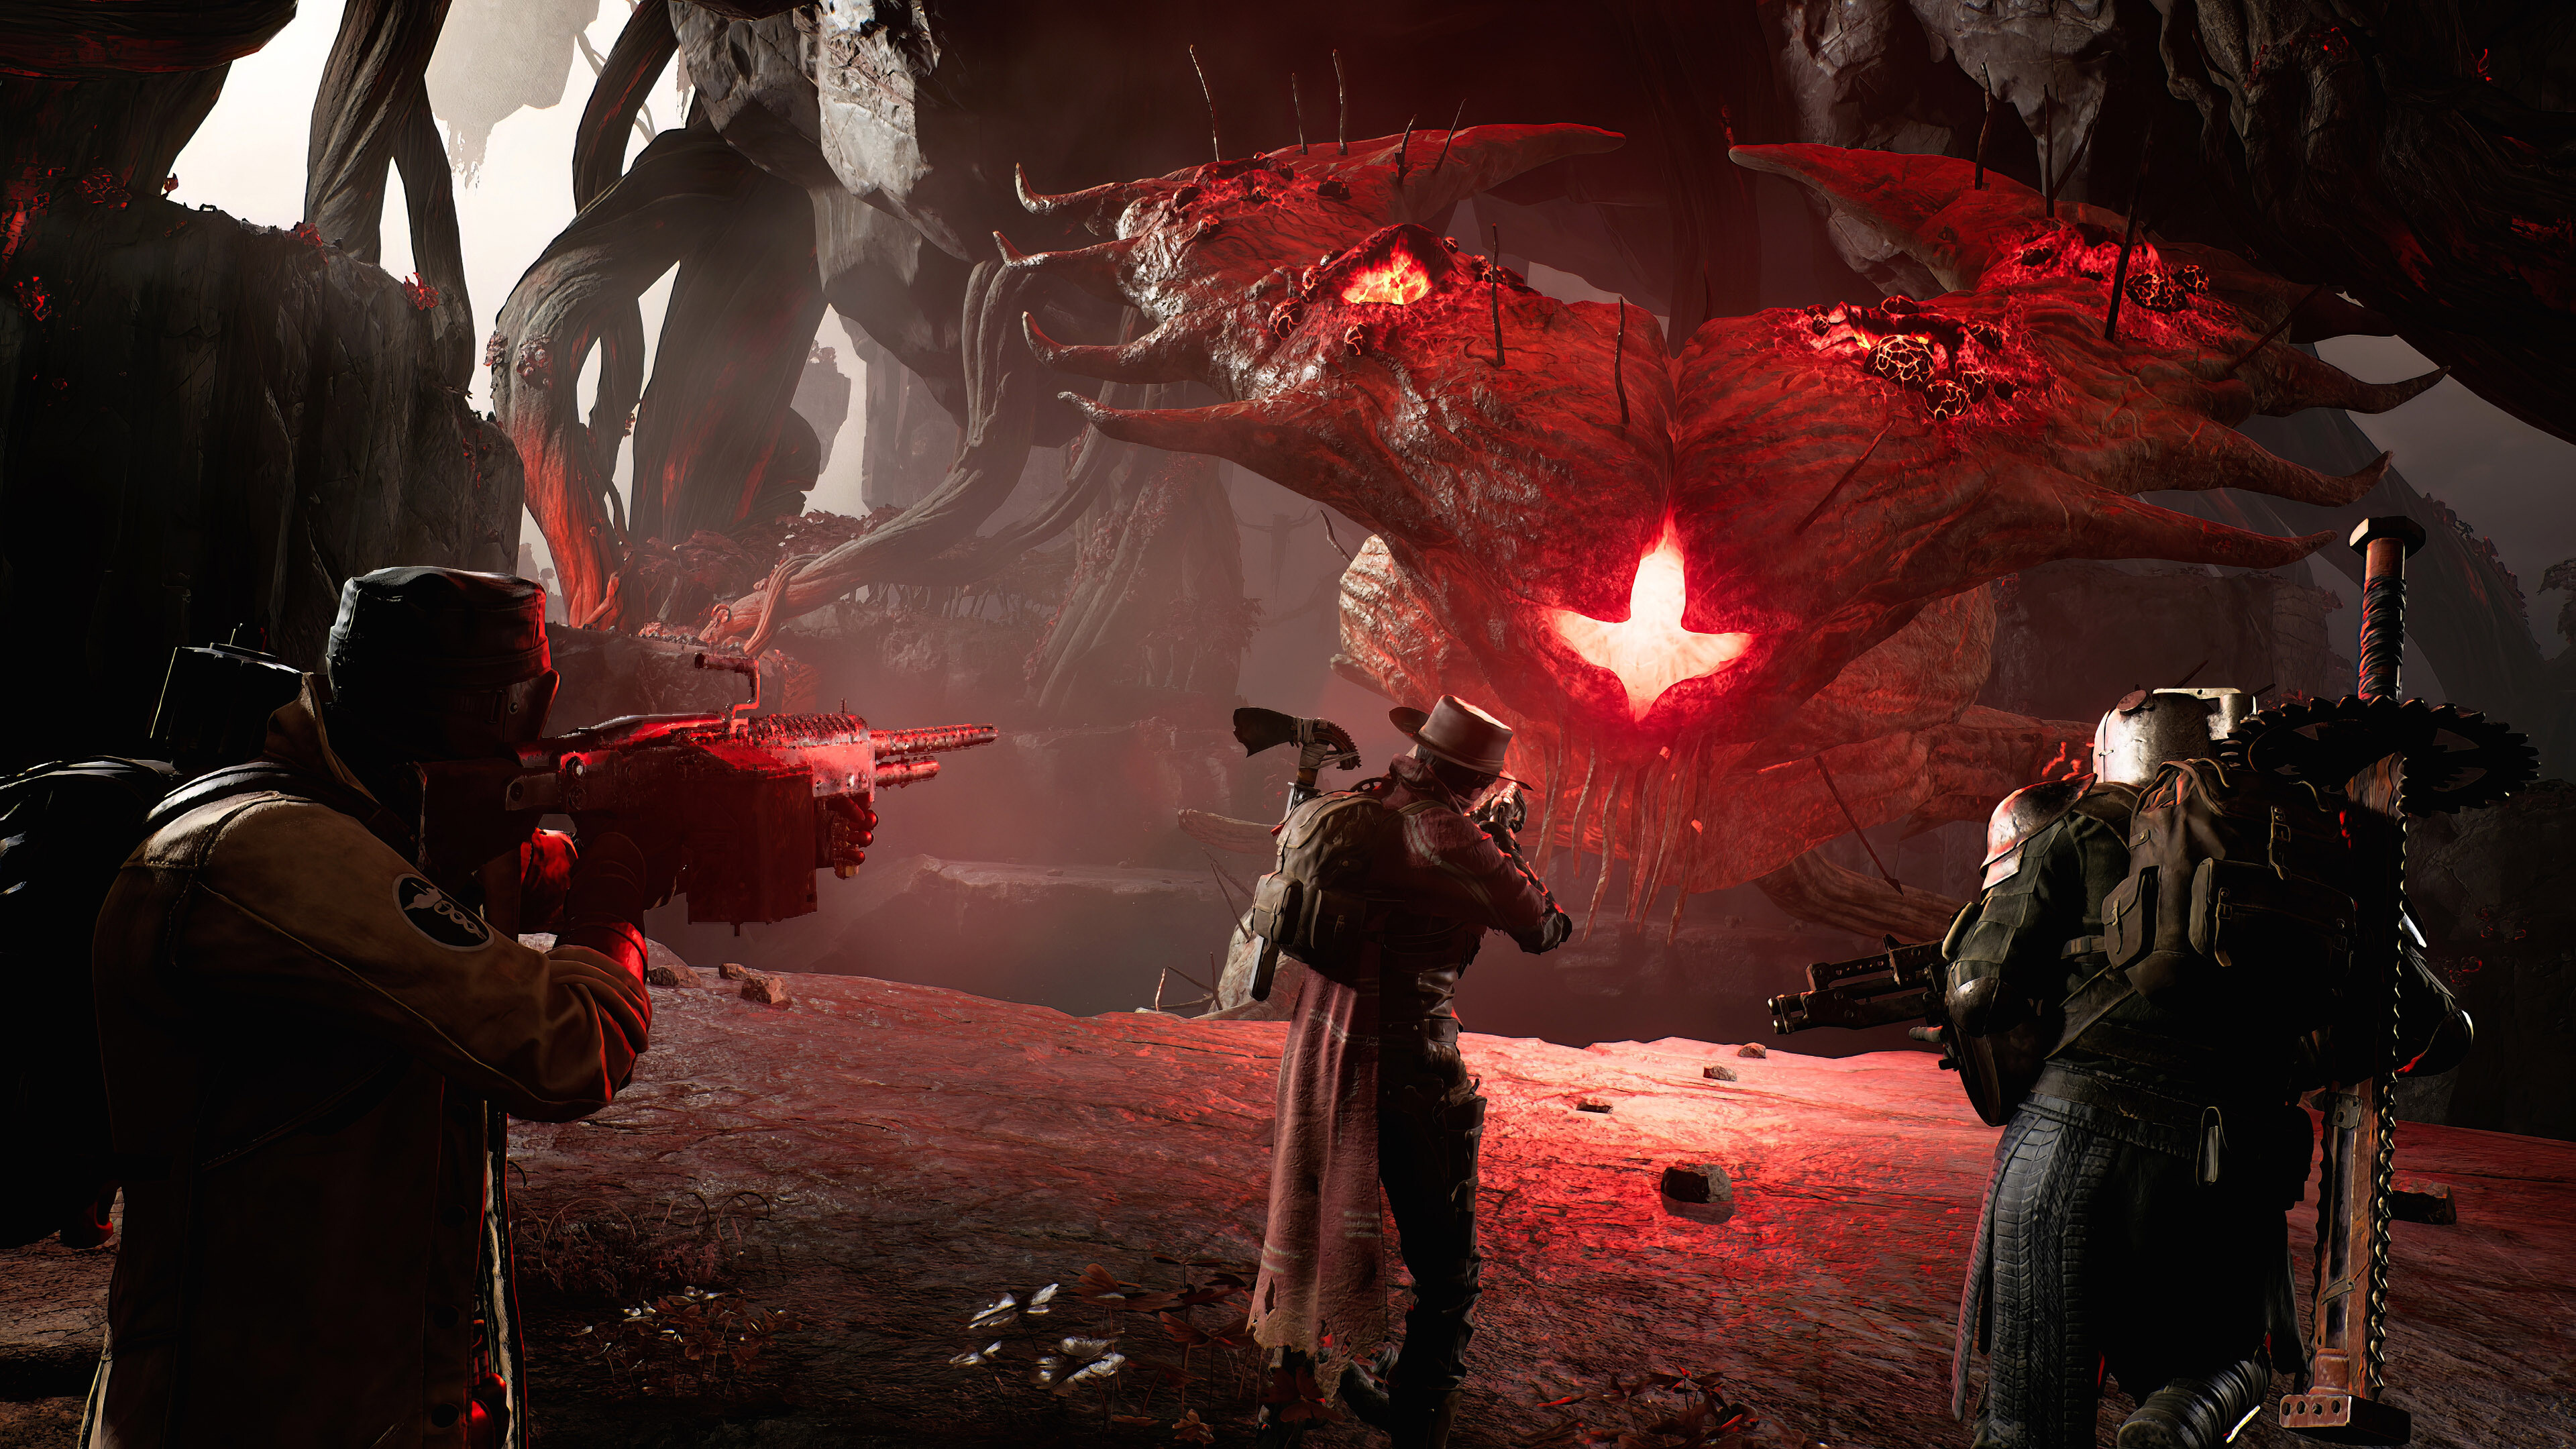 Three characters battle a giant eldritch horror in a screenshot from Remnant 2